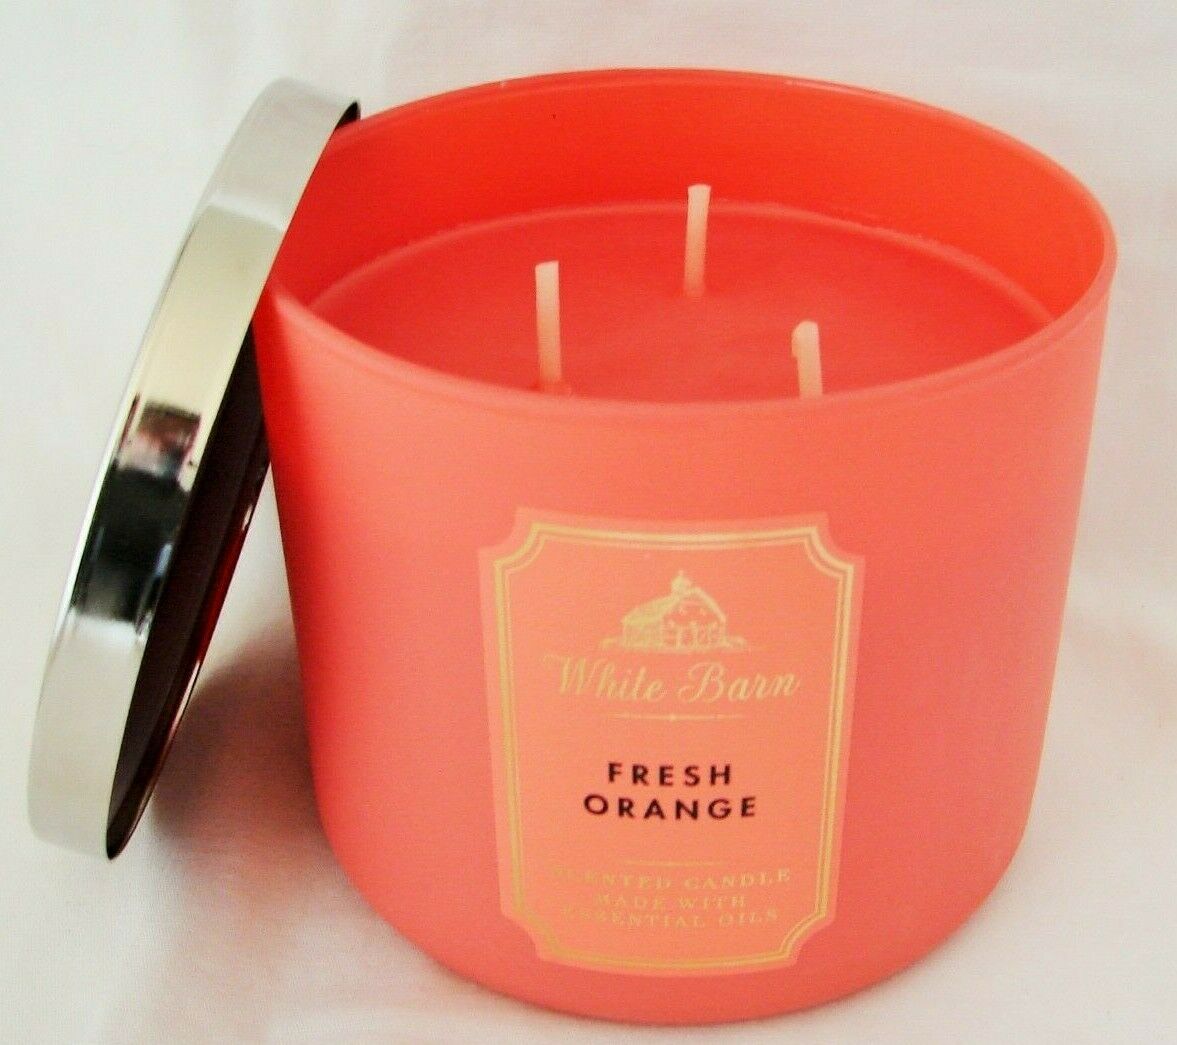 Fresh Orange scented candle - 3 wick candle - bath & body works